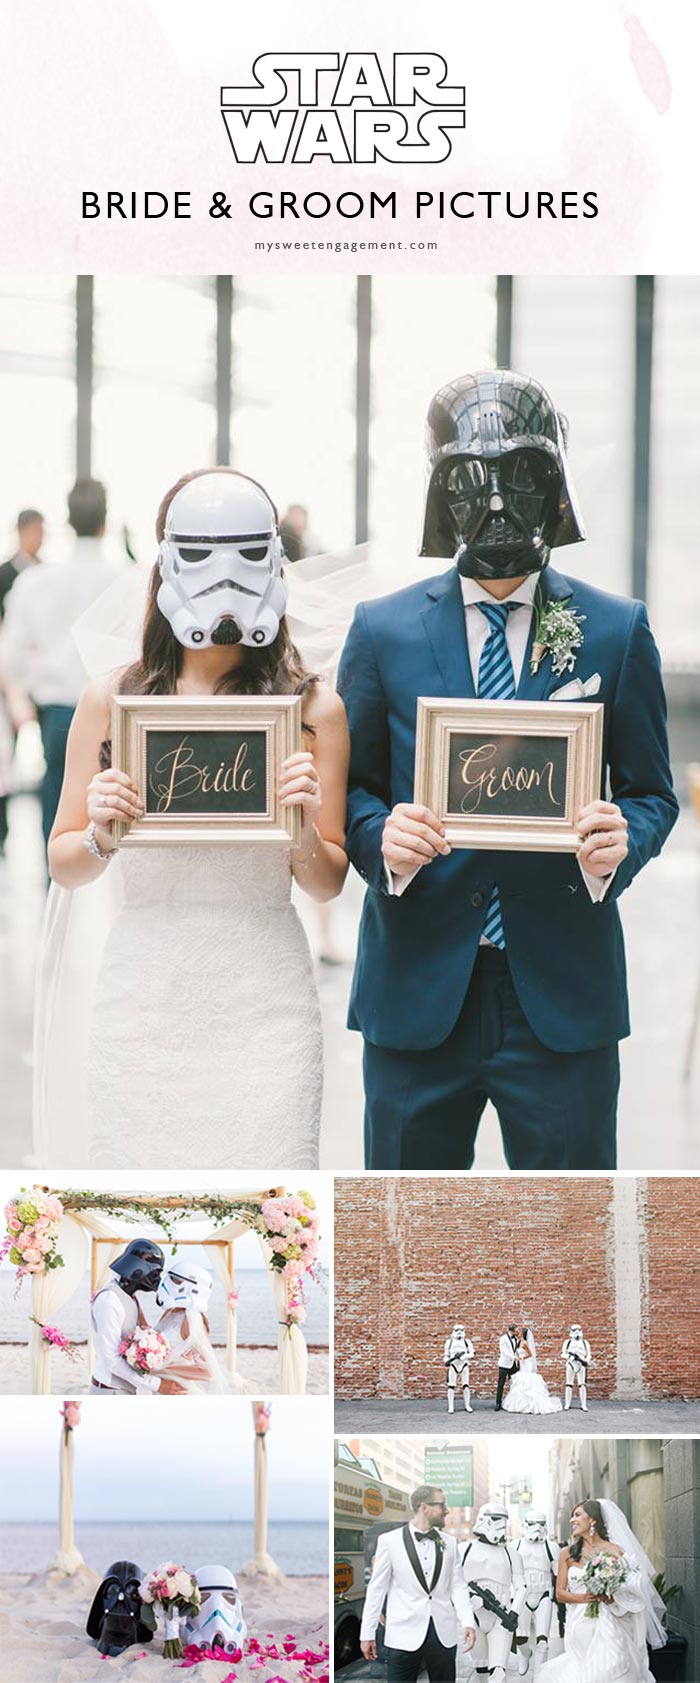 Bride and Groom photo ideas with Stormtrooper and Darth Vader helmets - even on the beach! What about this awesome Bride and Groom with Stormtroopers? Love it! // You're gonna love this Ultimate Guide for an Epic and Elegant Star Wars Wedding. // http://mysweetengagement.com